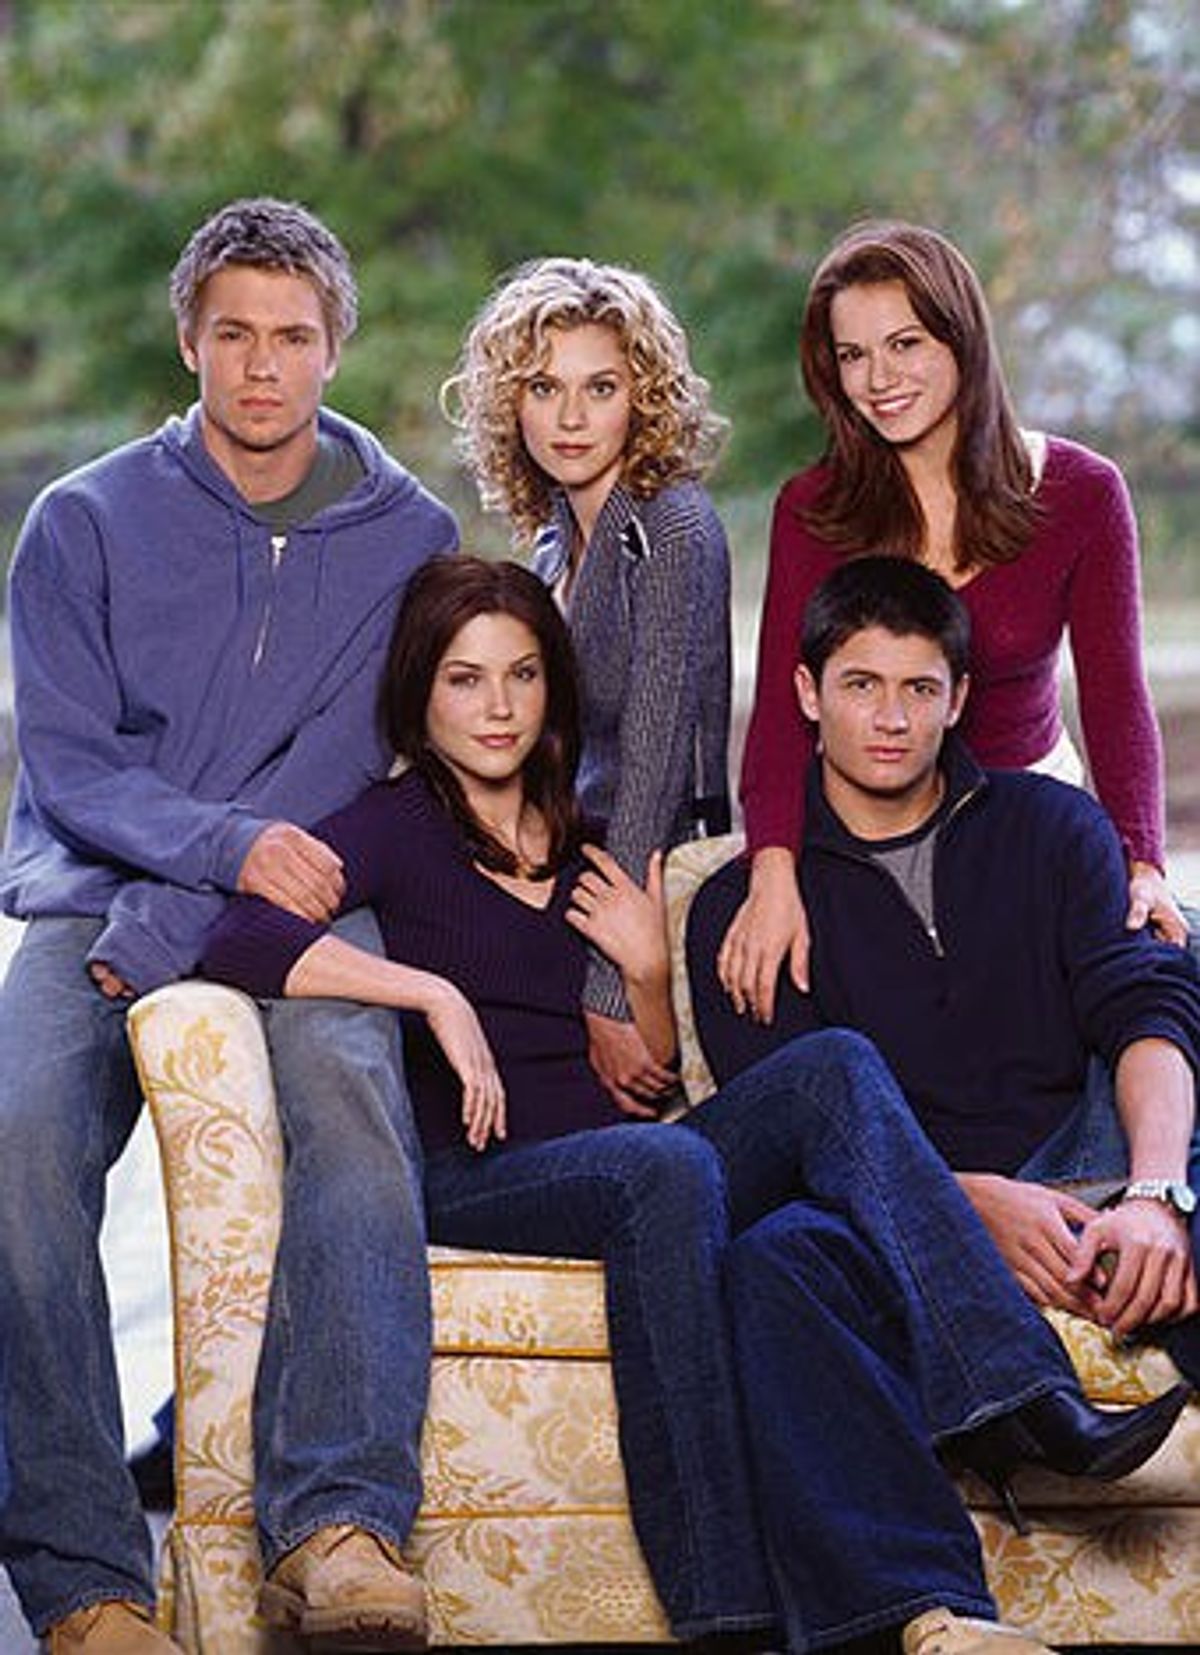 24 'One Tree Hill' Quotes To Live By